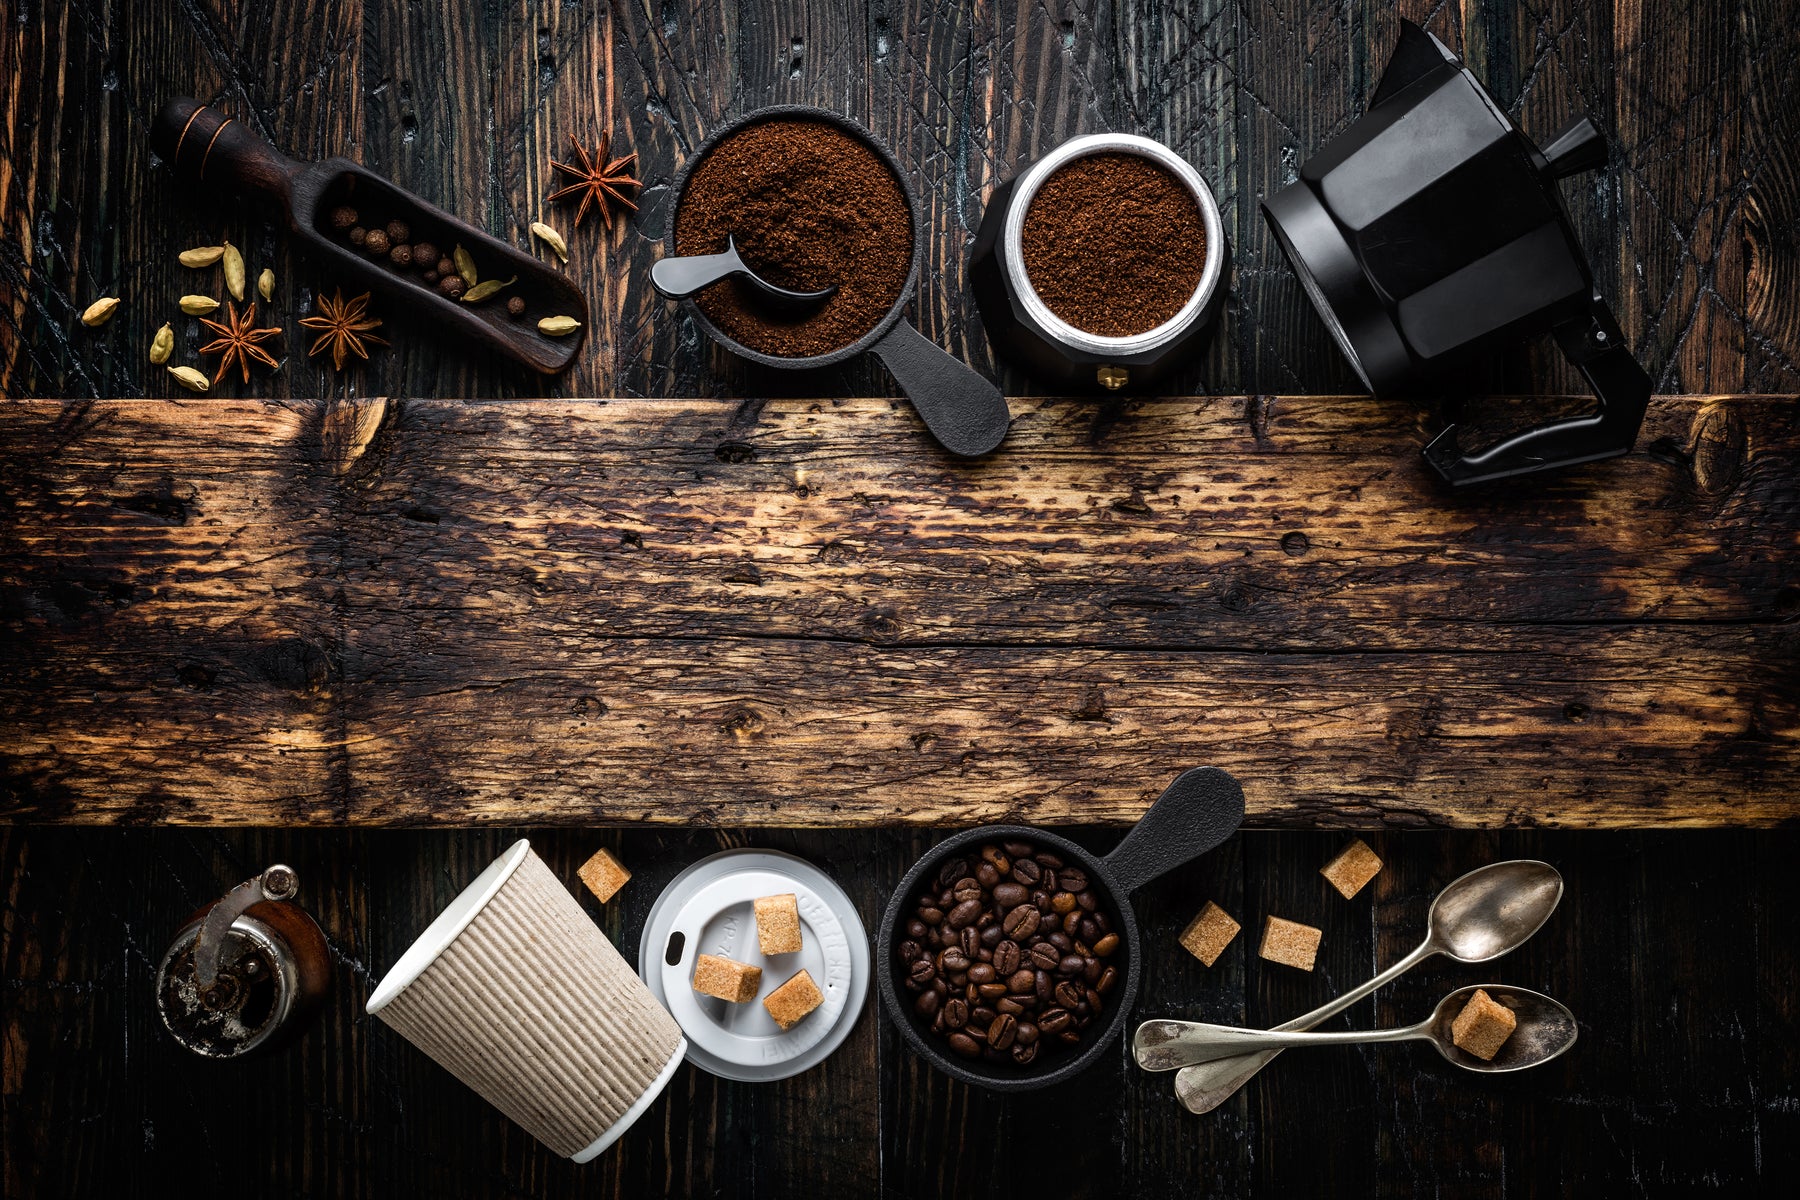 Overhead photo of coffee beans, grounds, spices, sugar, cups, grinders on wood